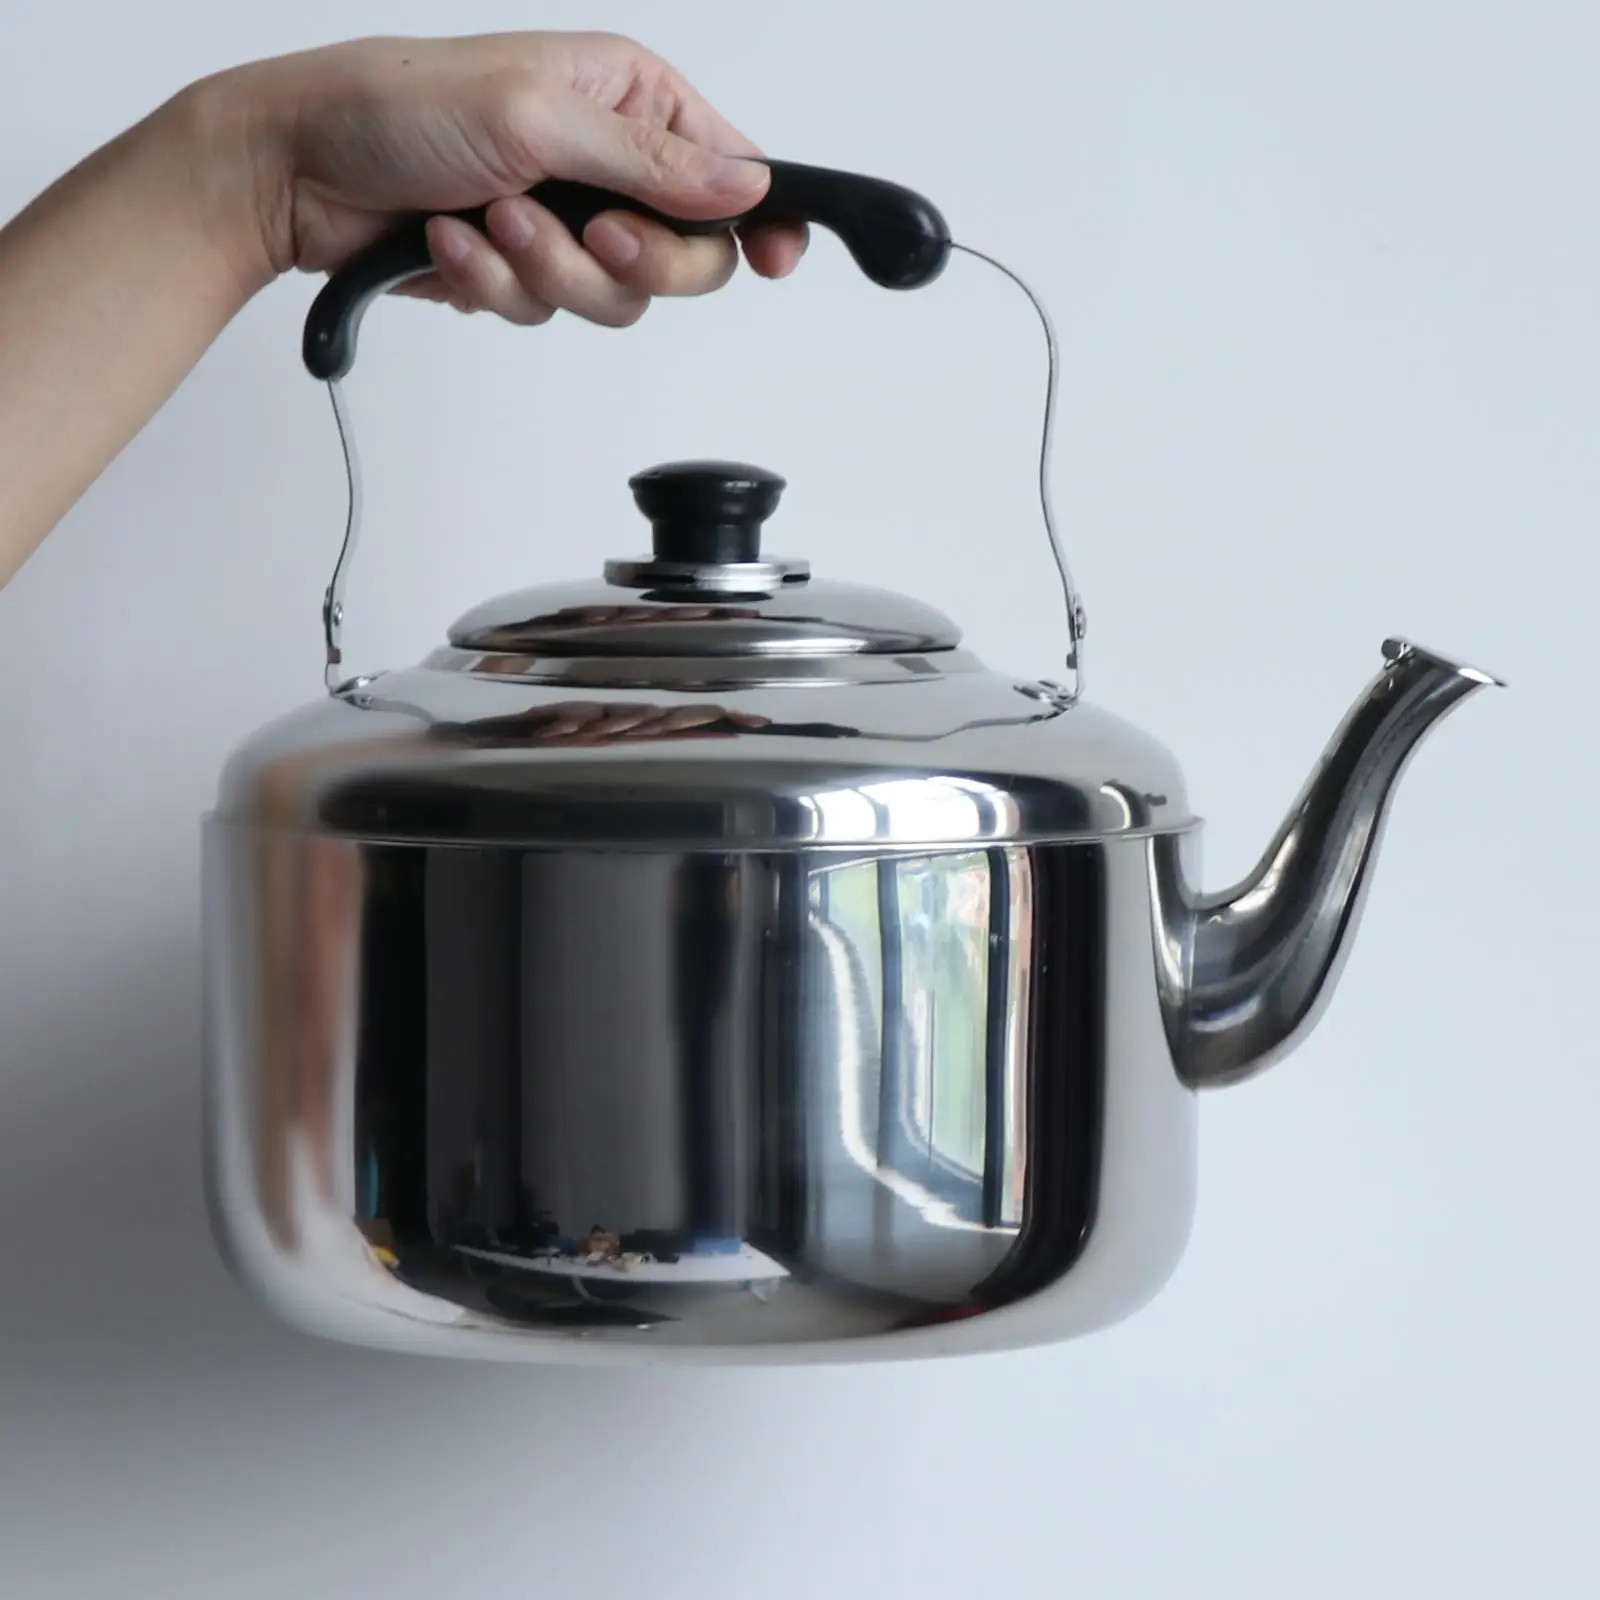 Kettle With Grooved Handle Stainless Steel Non-Slip pot tea Kettle Hob